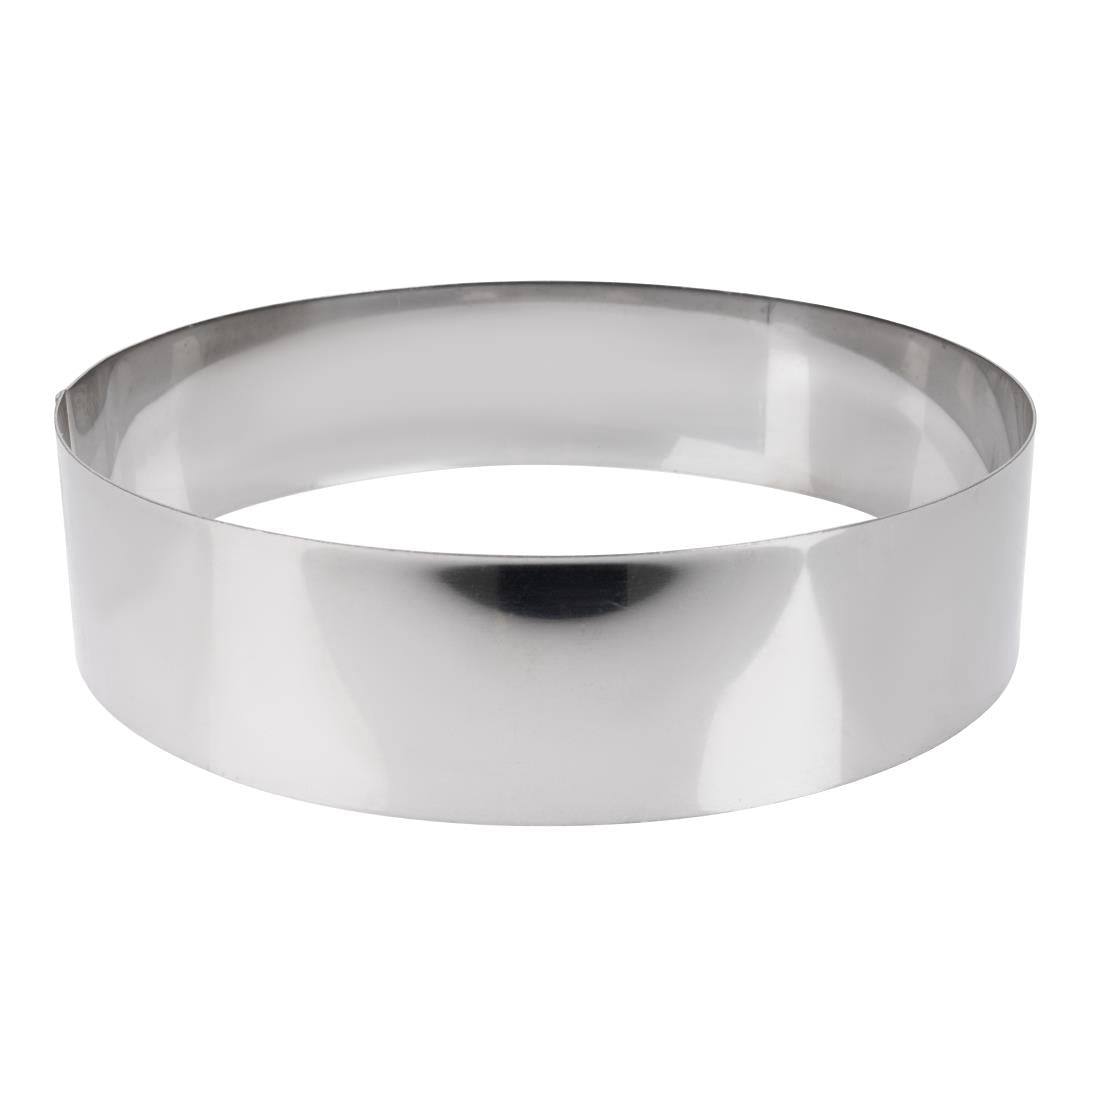 De Buyer Stainless Steel Mousse Ring 240 x 60mm JD Catering Equipment Solutions Ltd